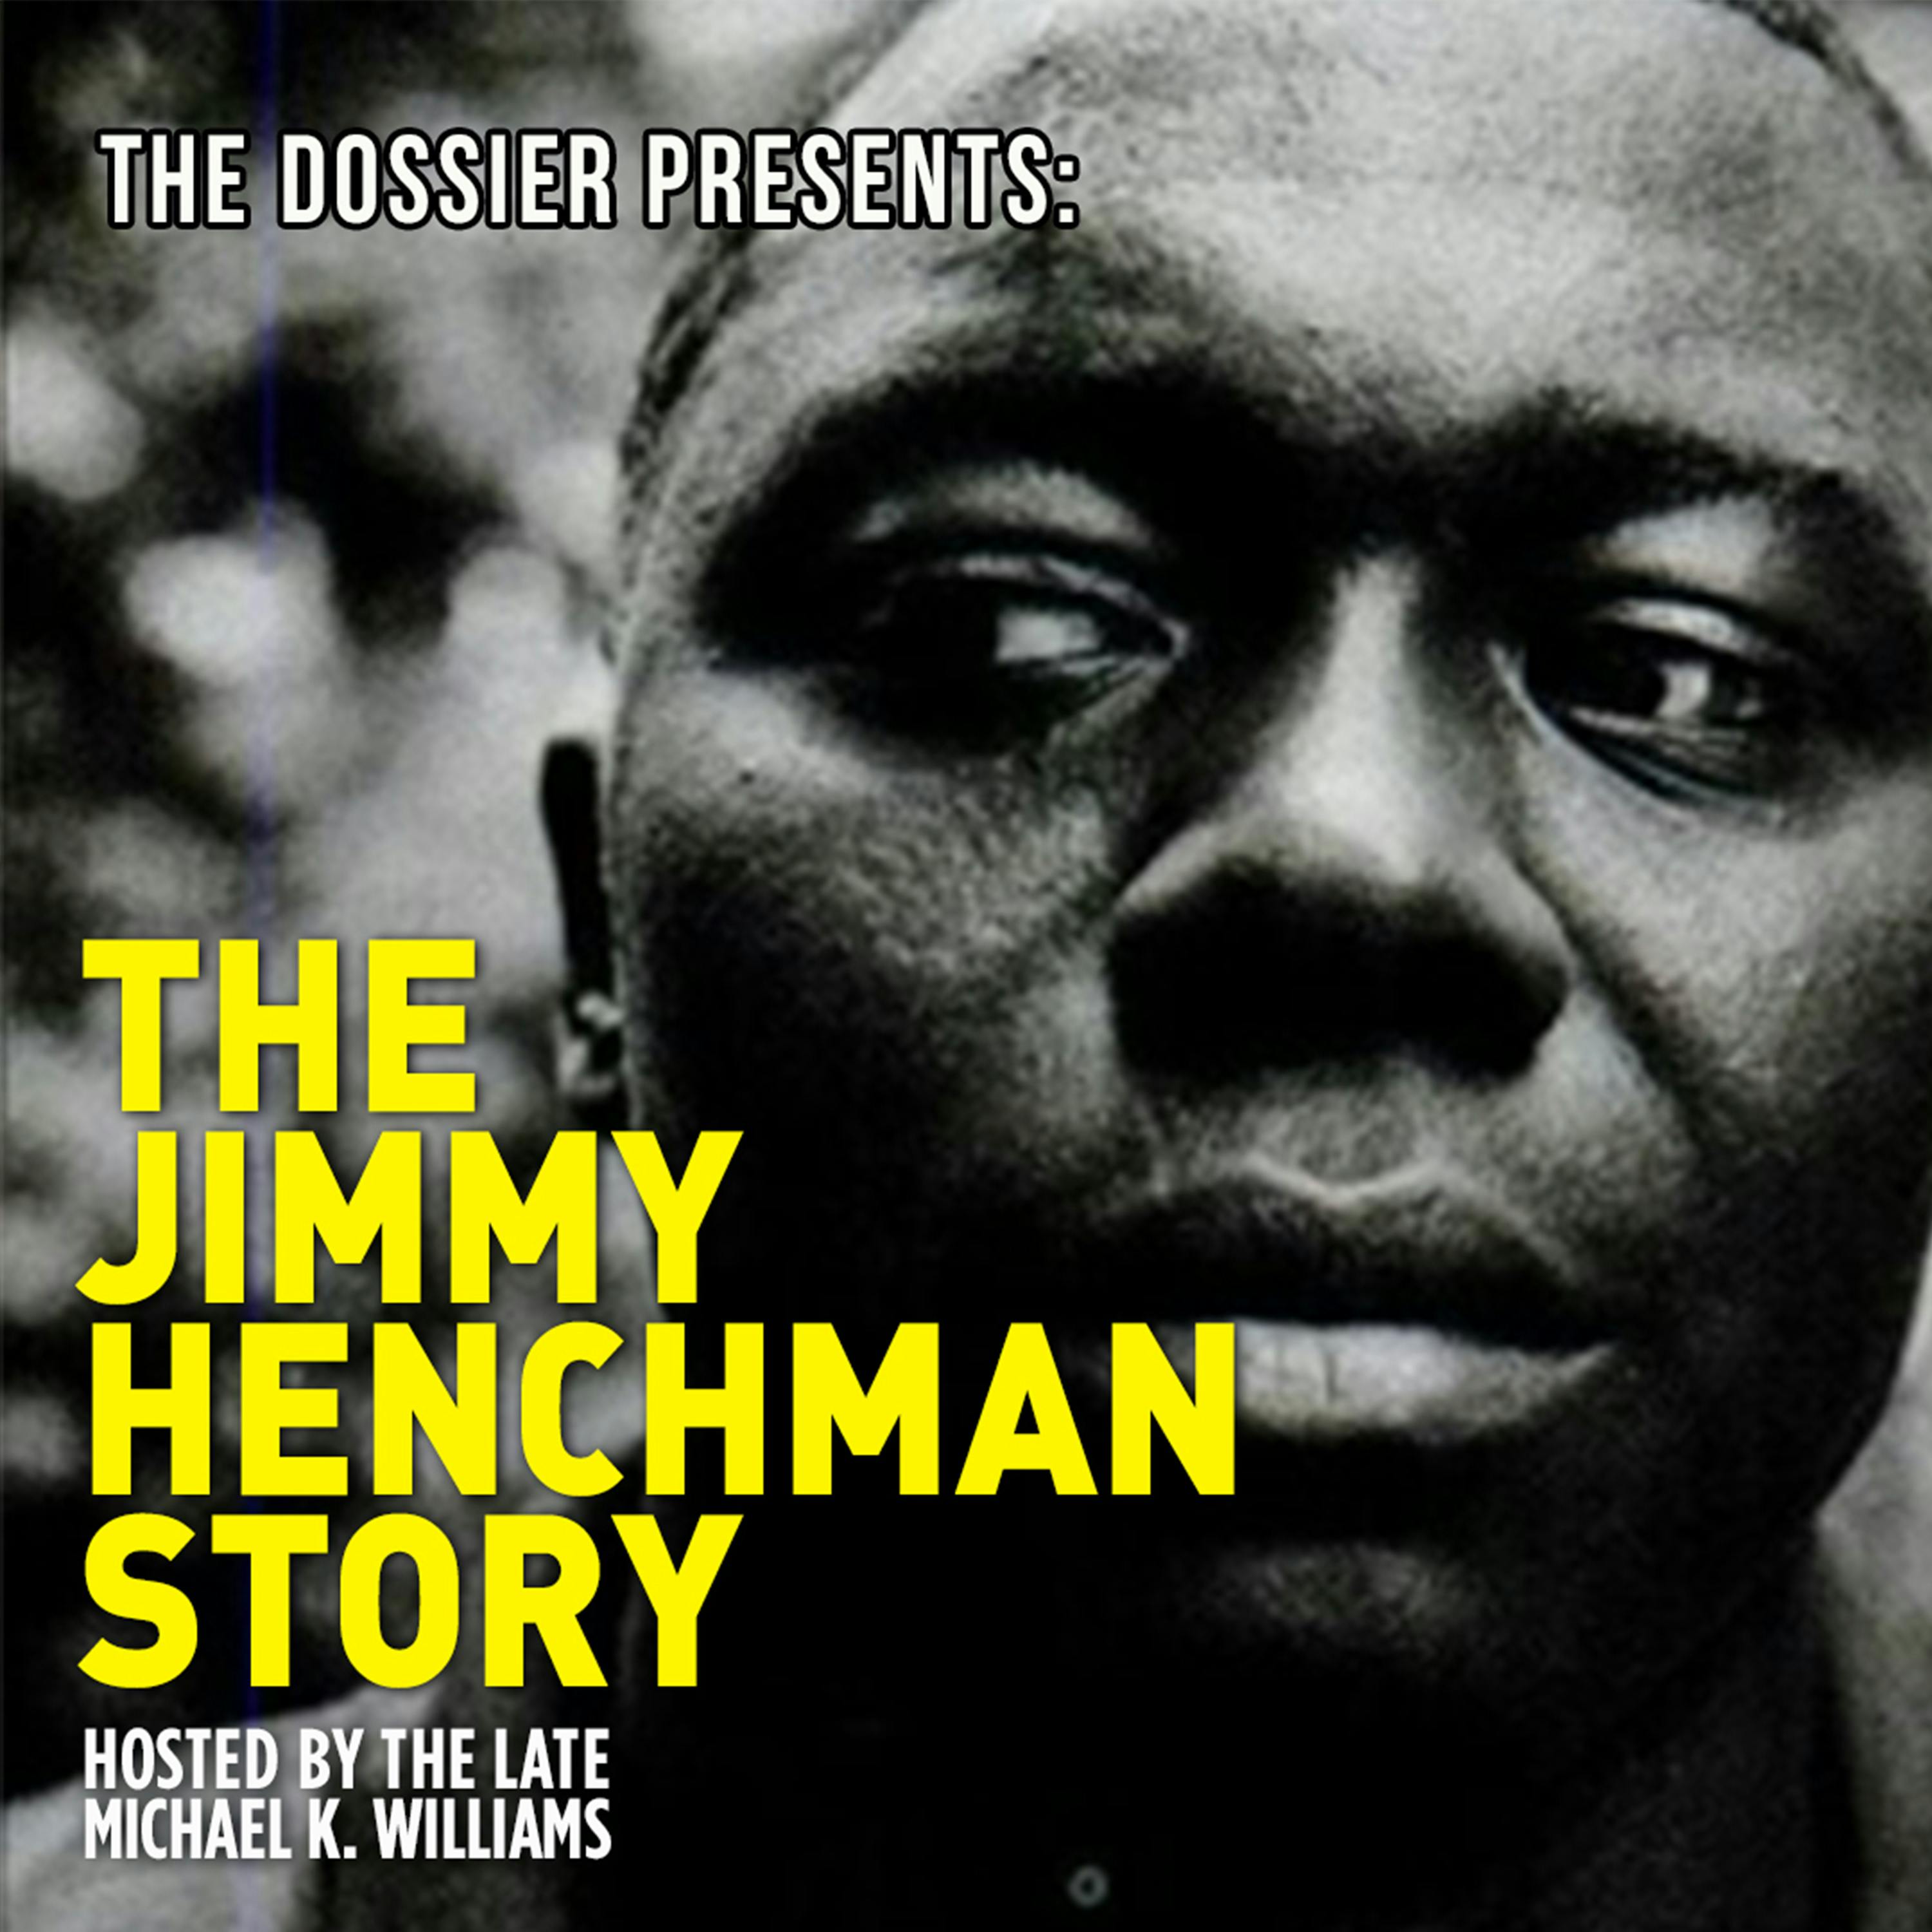 THE JIMMY HENCHMAN STORY - EP. 15 - BRUCE MAFFEO INTERVIEW PT. 2